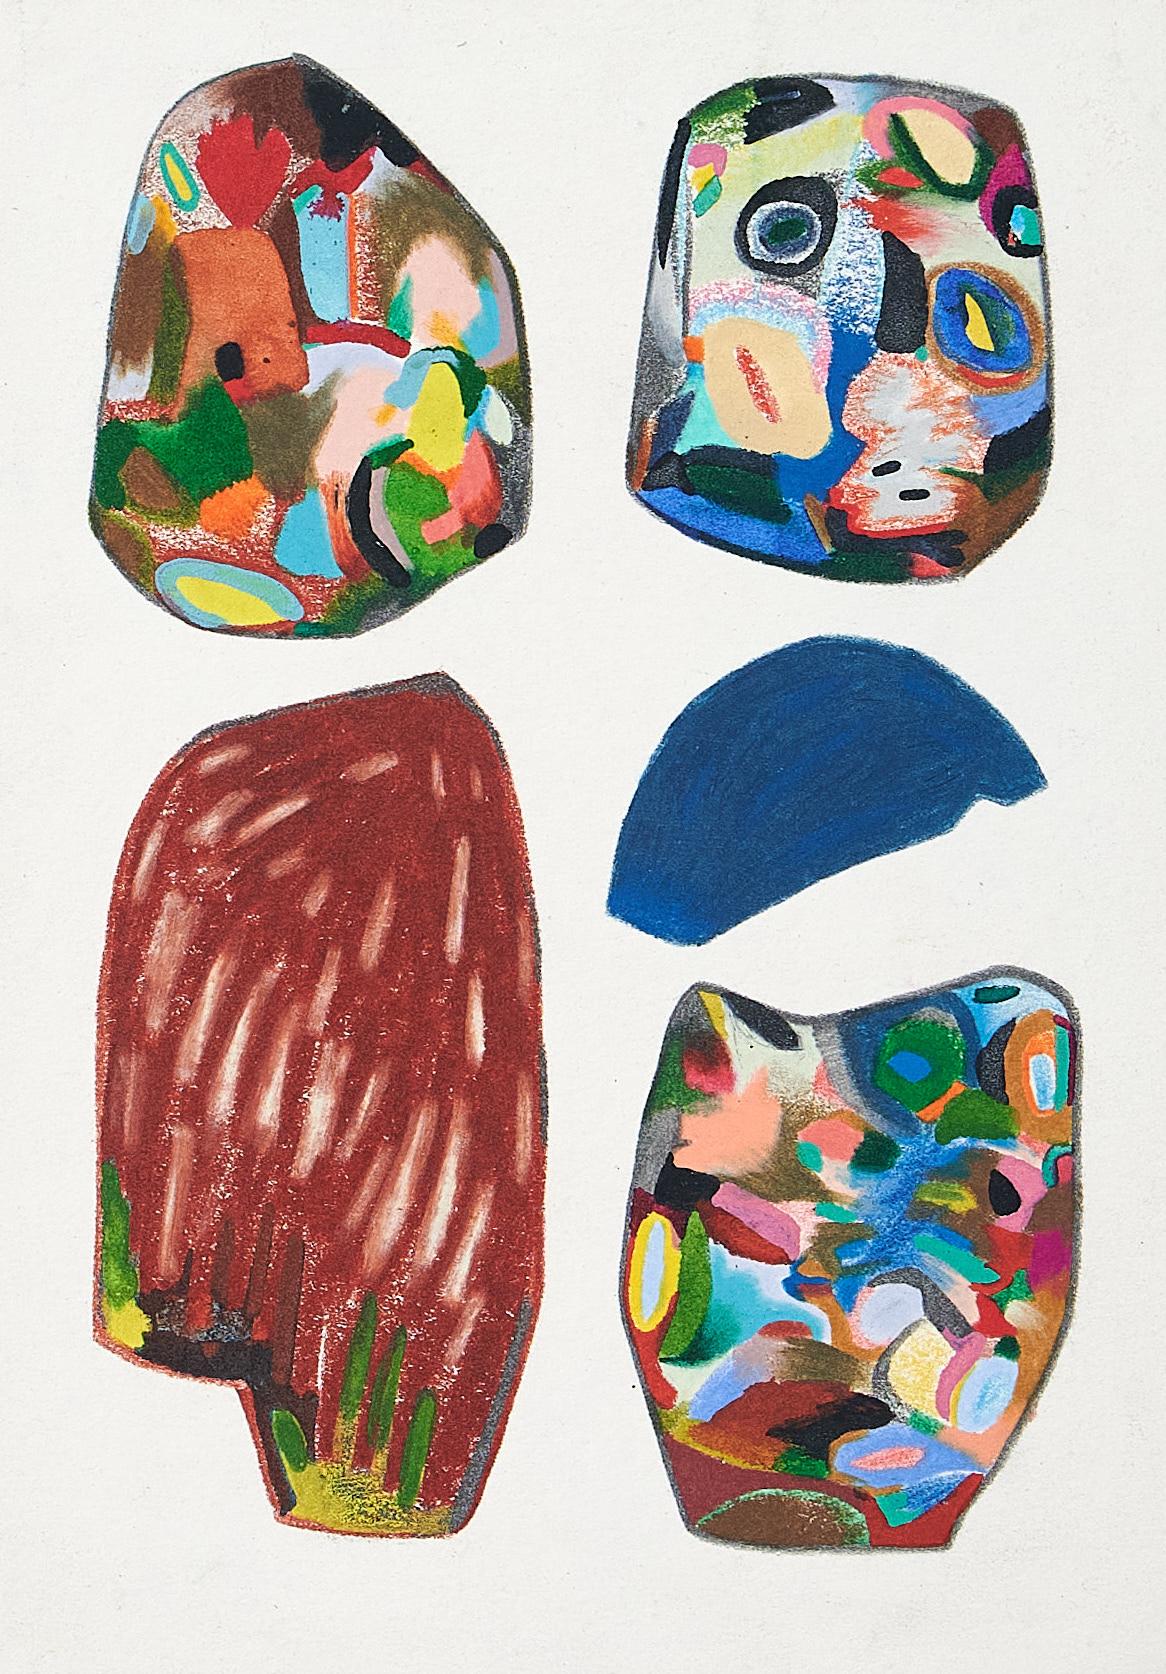 Untitled, Small Vessels No. 1, multicolored abstract work on paper